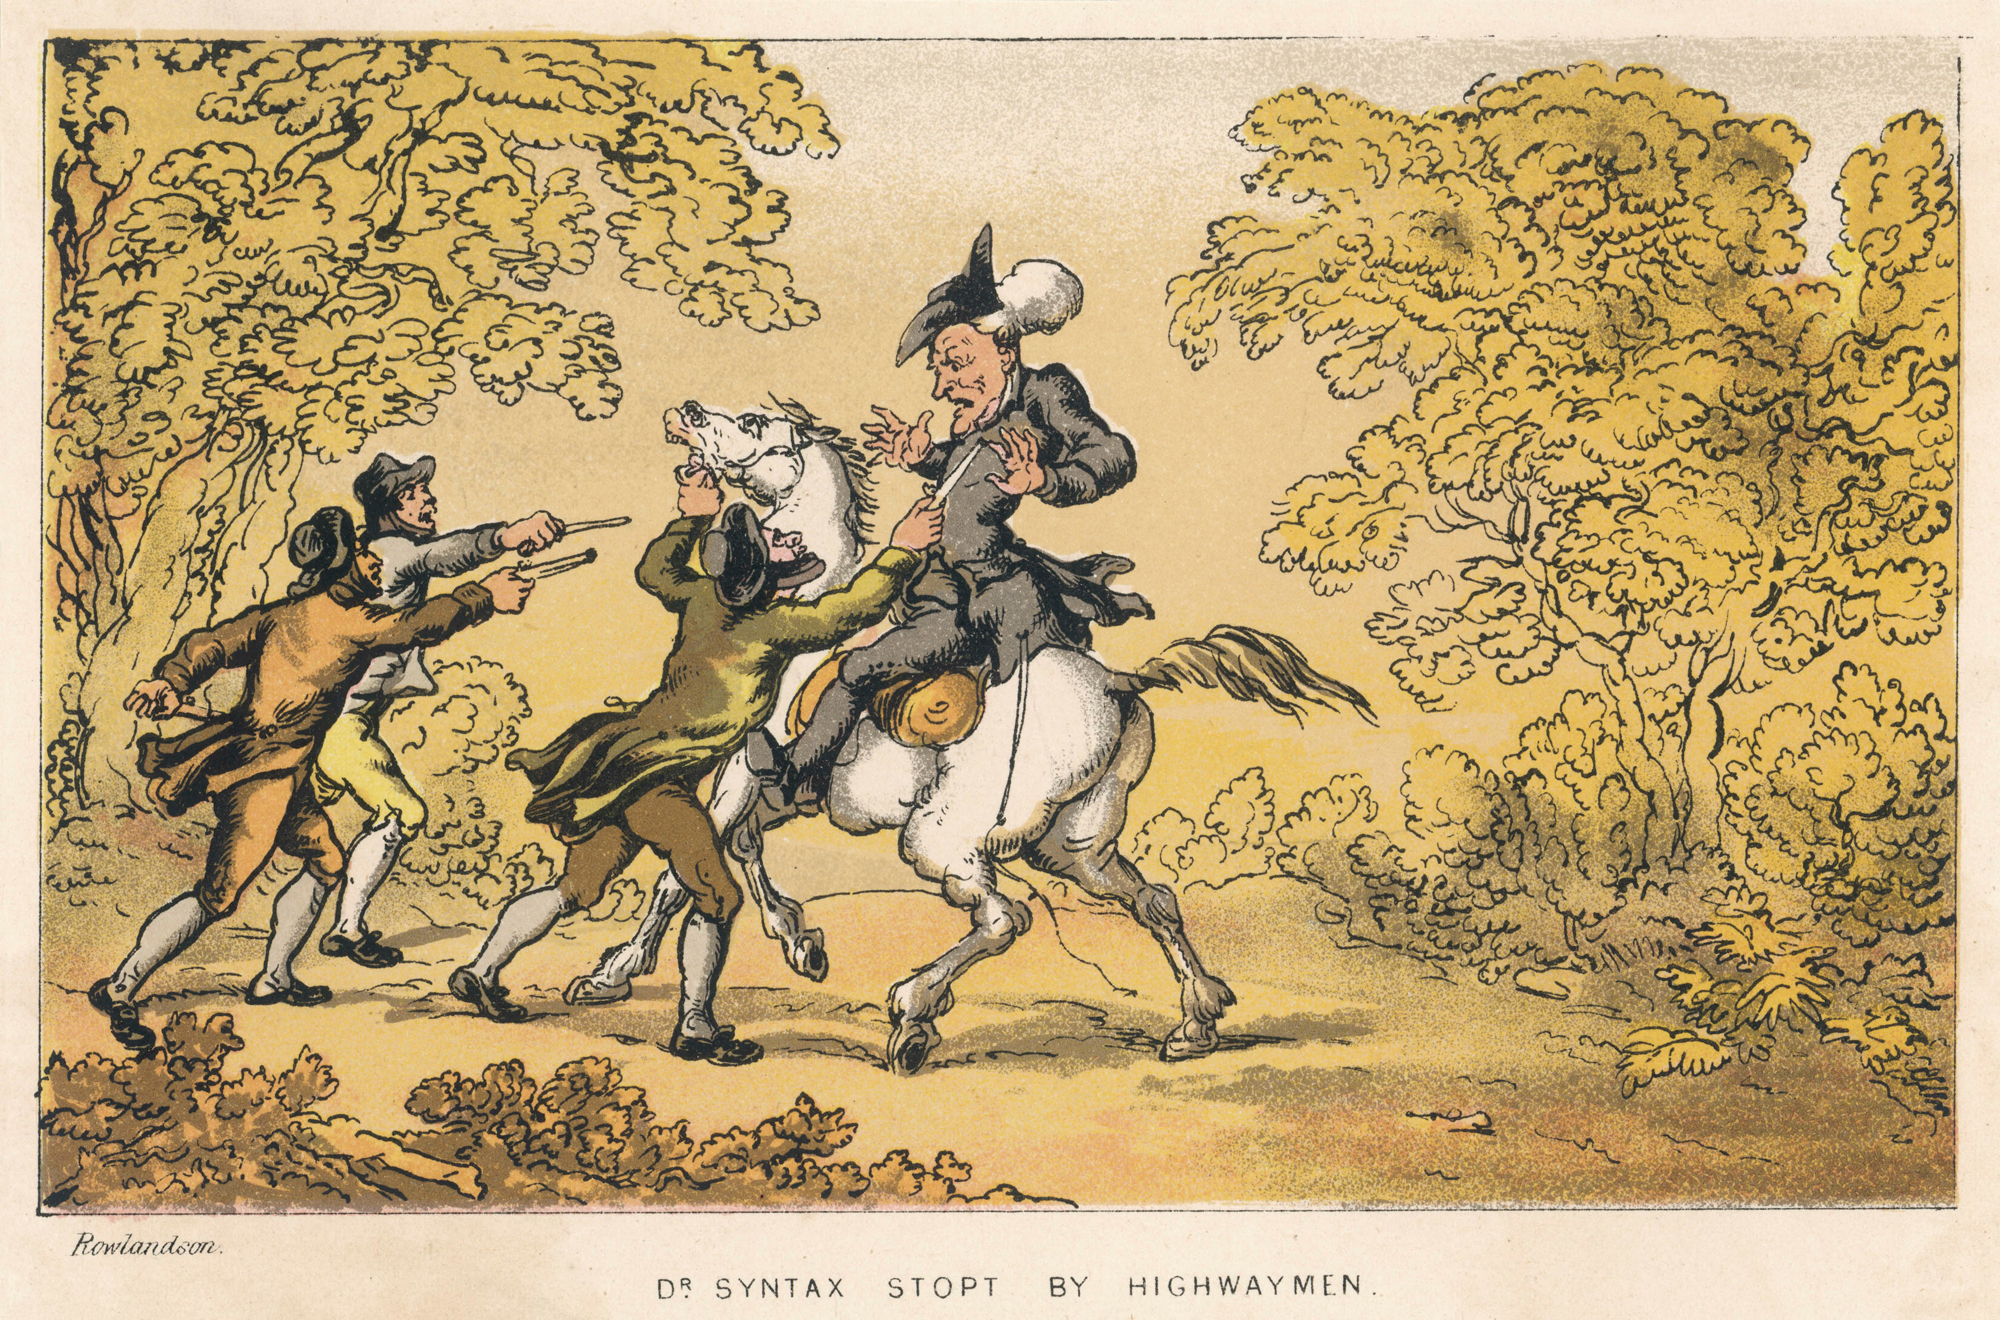 Dr Syntax stopped by highwaymen, 1813